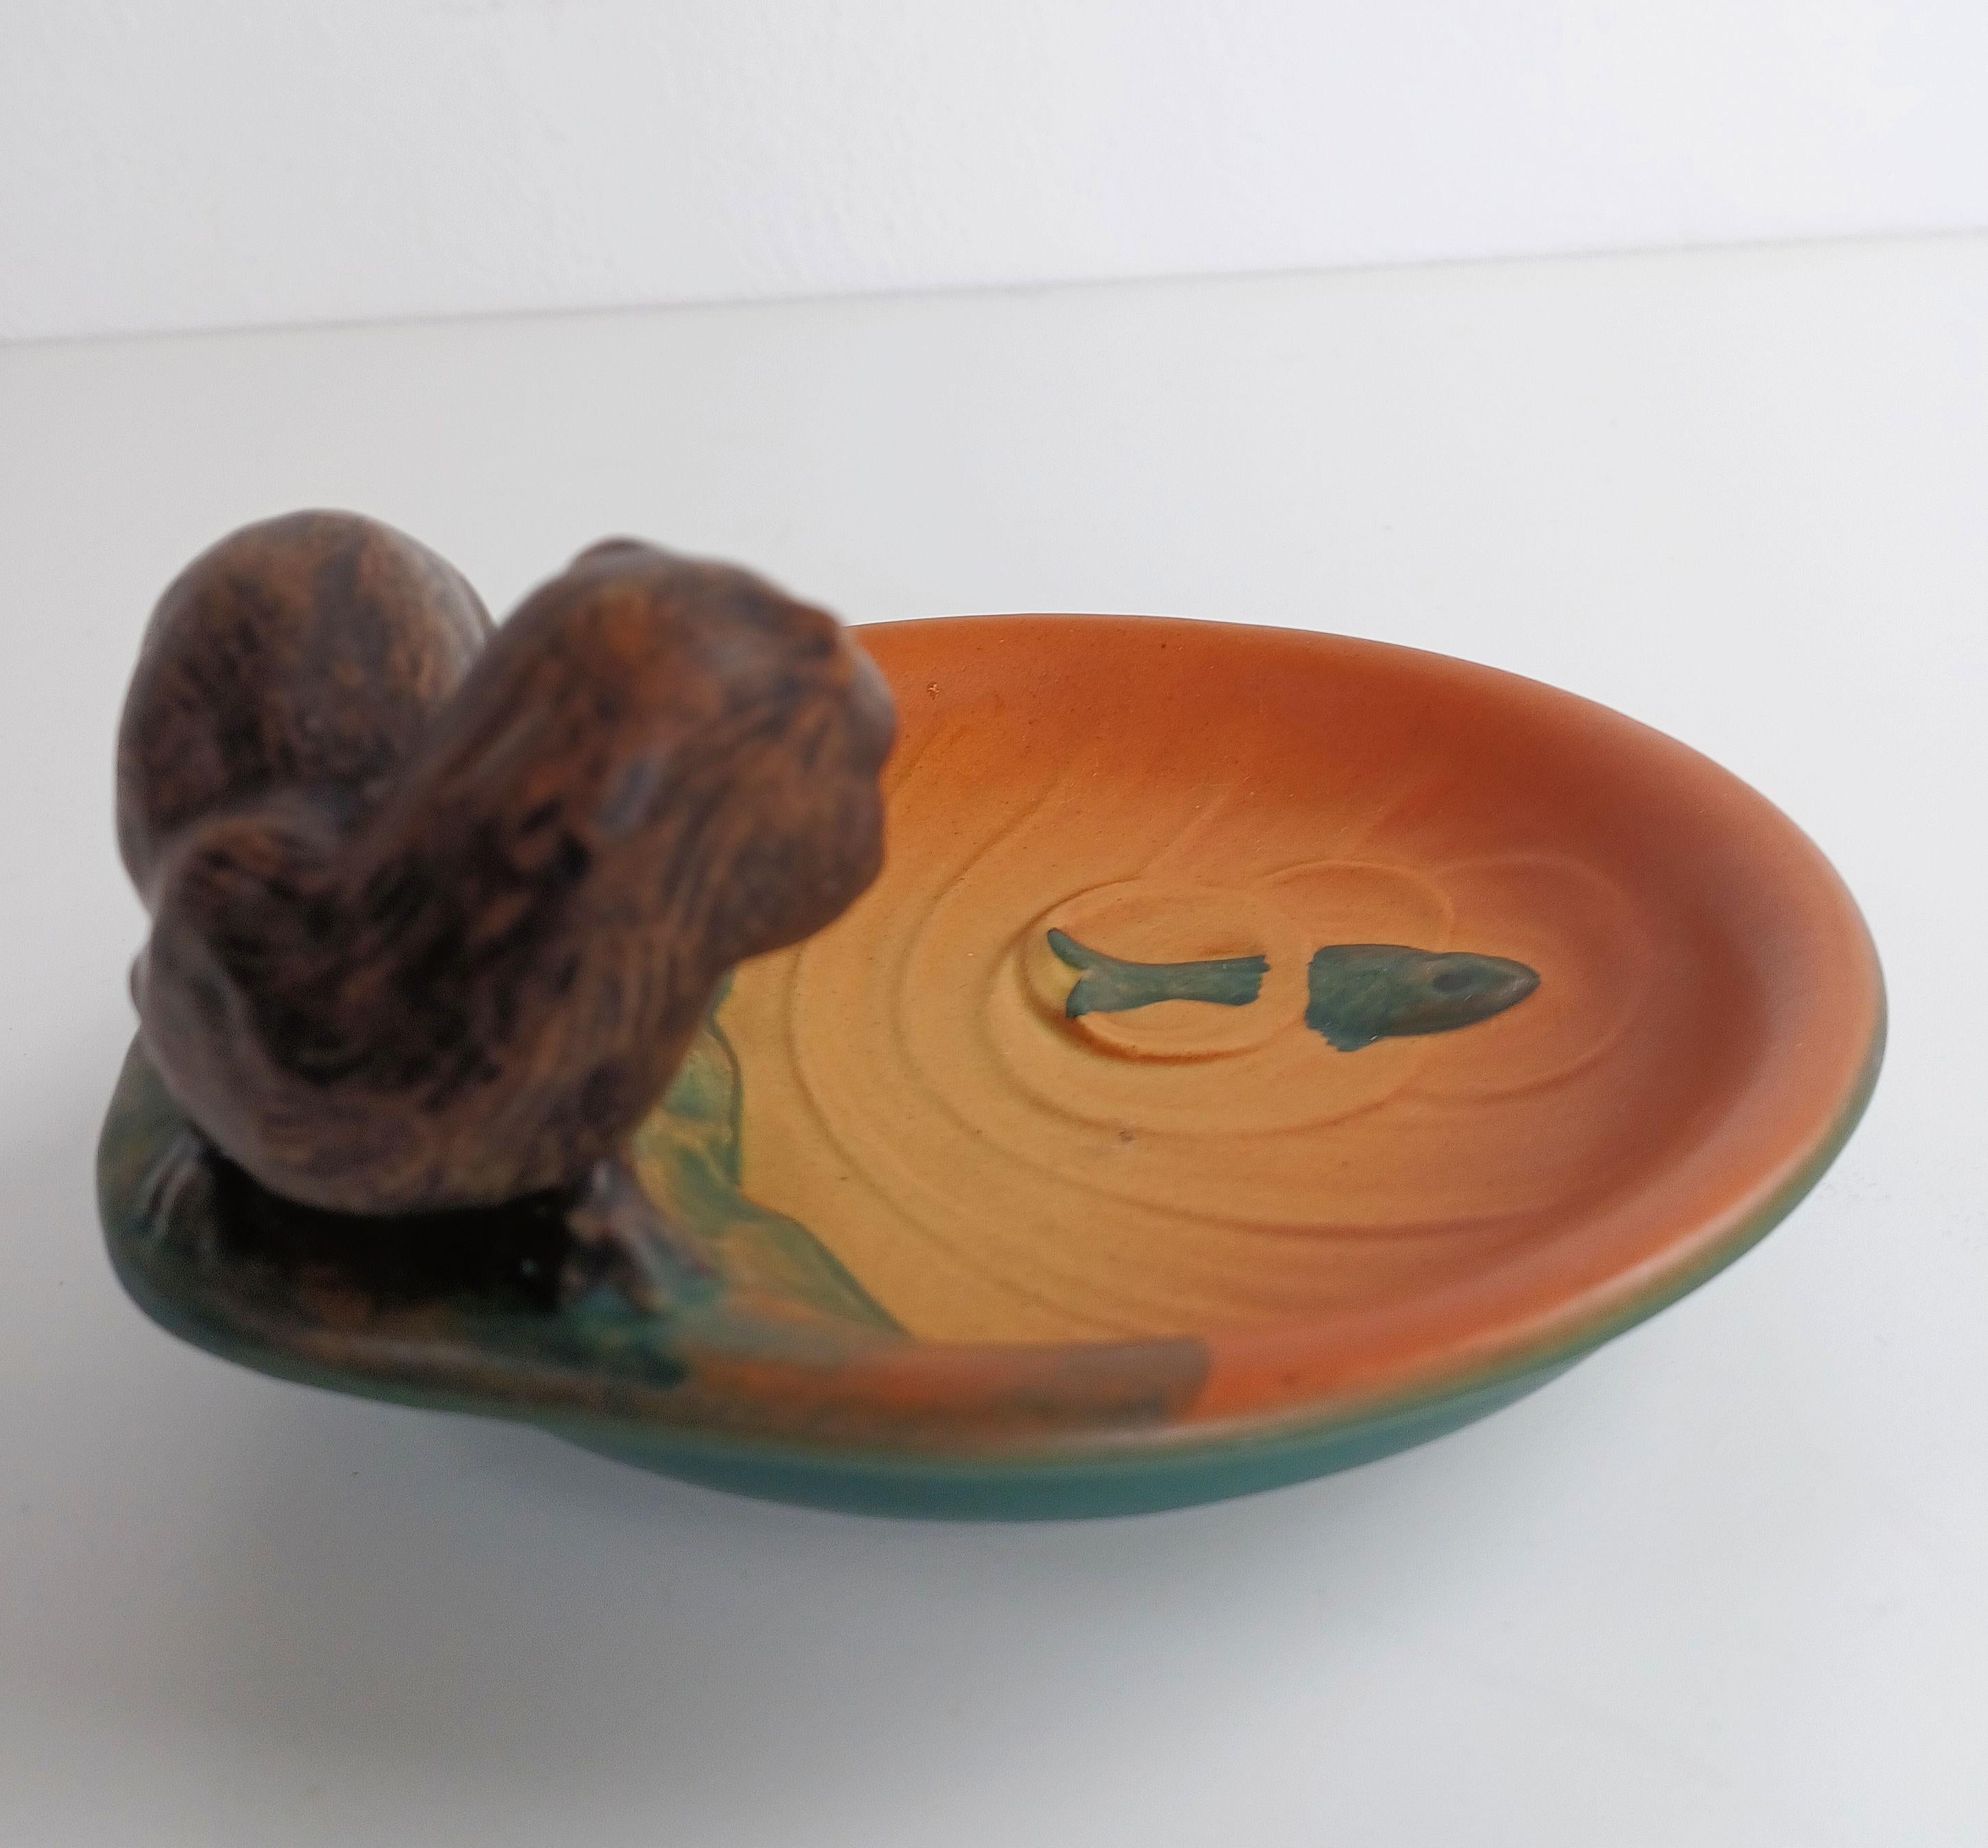 Early 20th Century 1930s Danish Hand-Crafted Art Nouveau Polecat Ash Tray / Bowl by P. Ipsens Enke For Sale